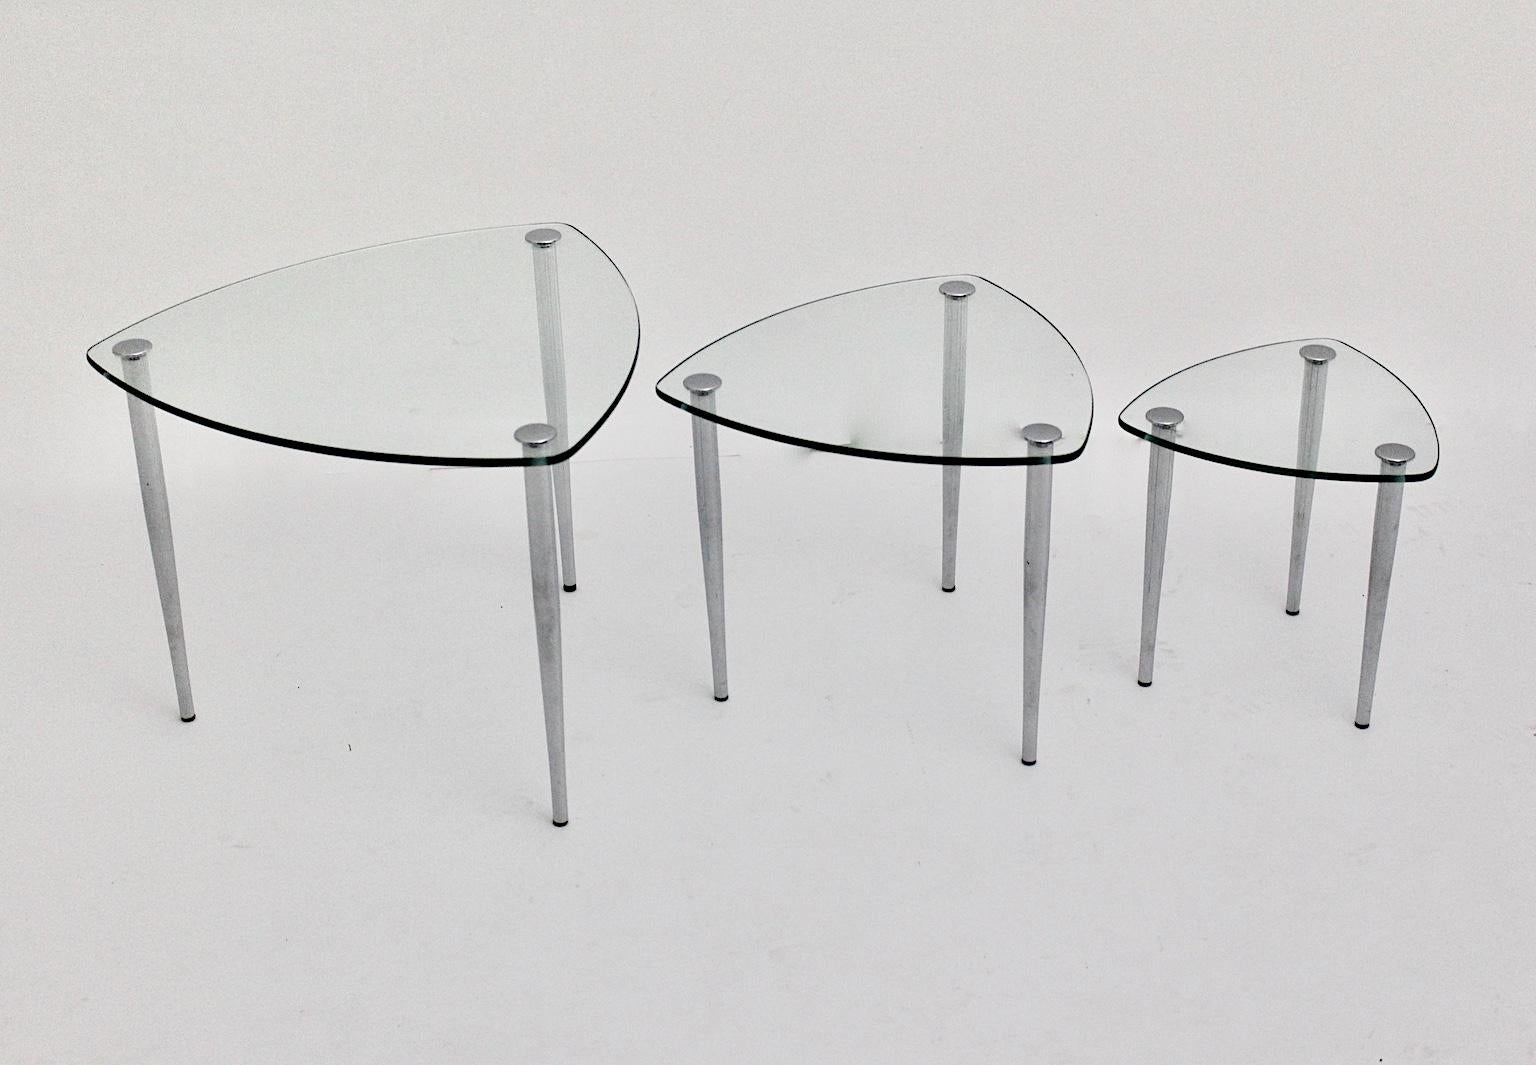 Mid century Modern  three vintage nesting tables, which features three chromed feet connected with a clear glass plate. The feet are also easy to screwable.
Also the tables show three sizes and a triangle shape.
Designed and manufactured in Italy